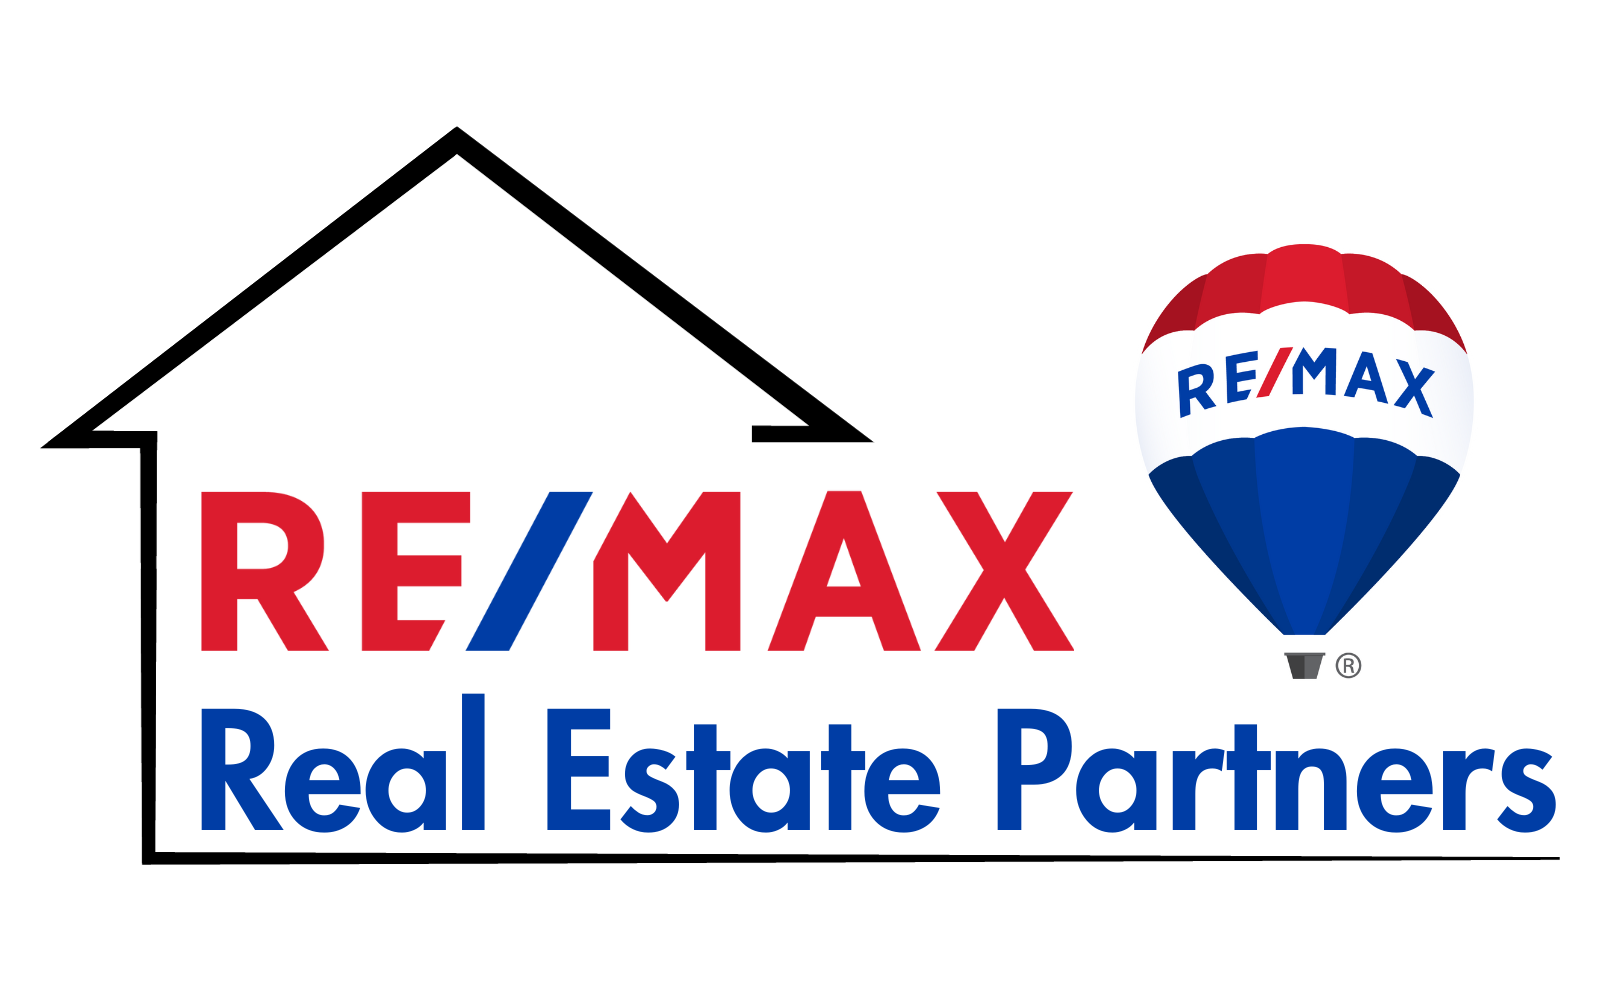 RE/MAX Real Estate Partners